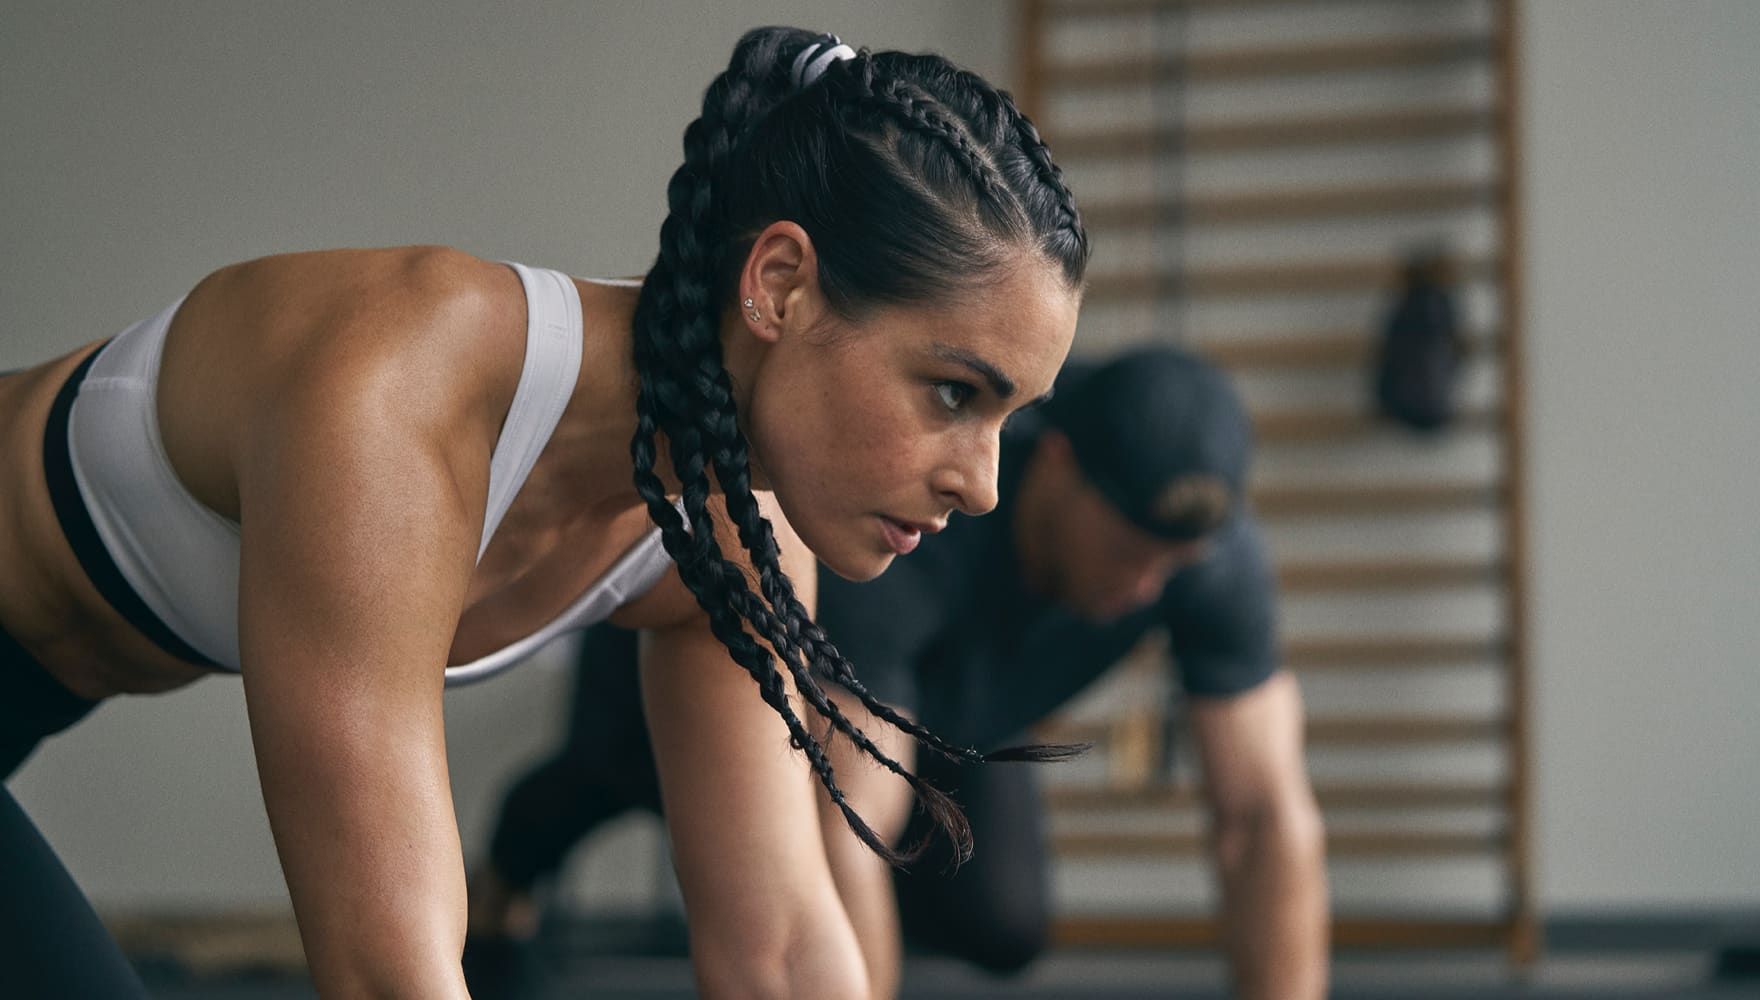 Juntar Aclarar Detectable No Gym, No Problem: The 10 Best At-Home Workouts to Try Now. Nike.com